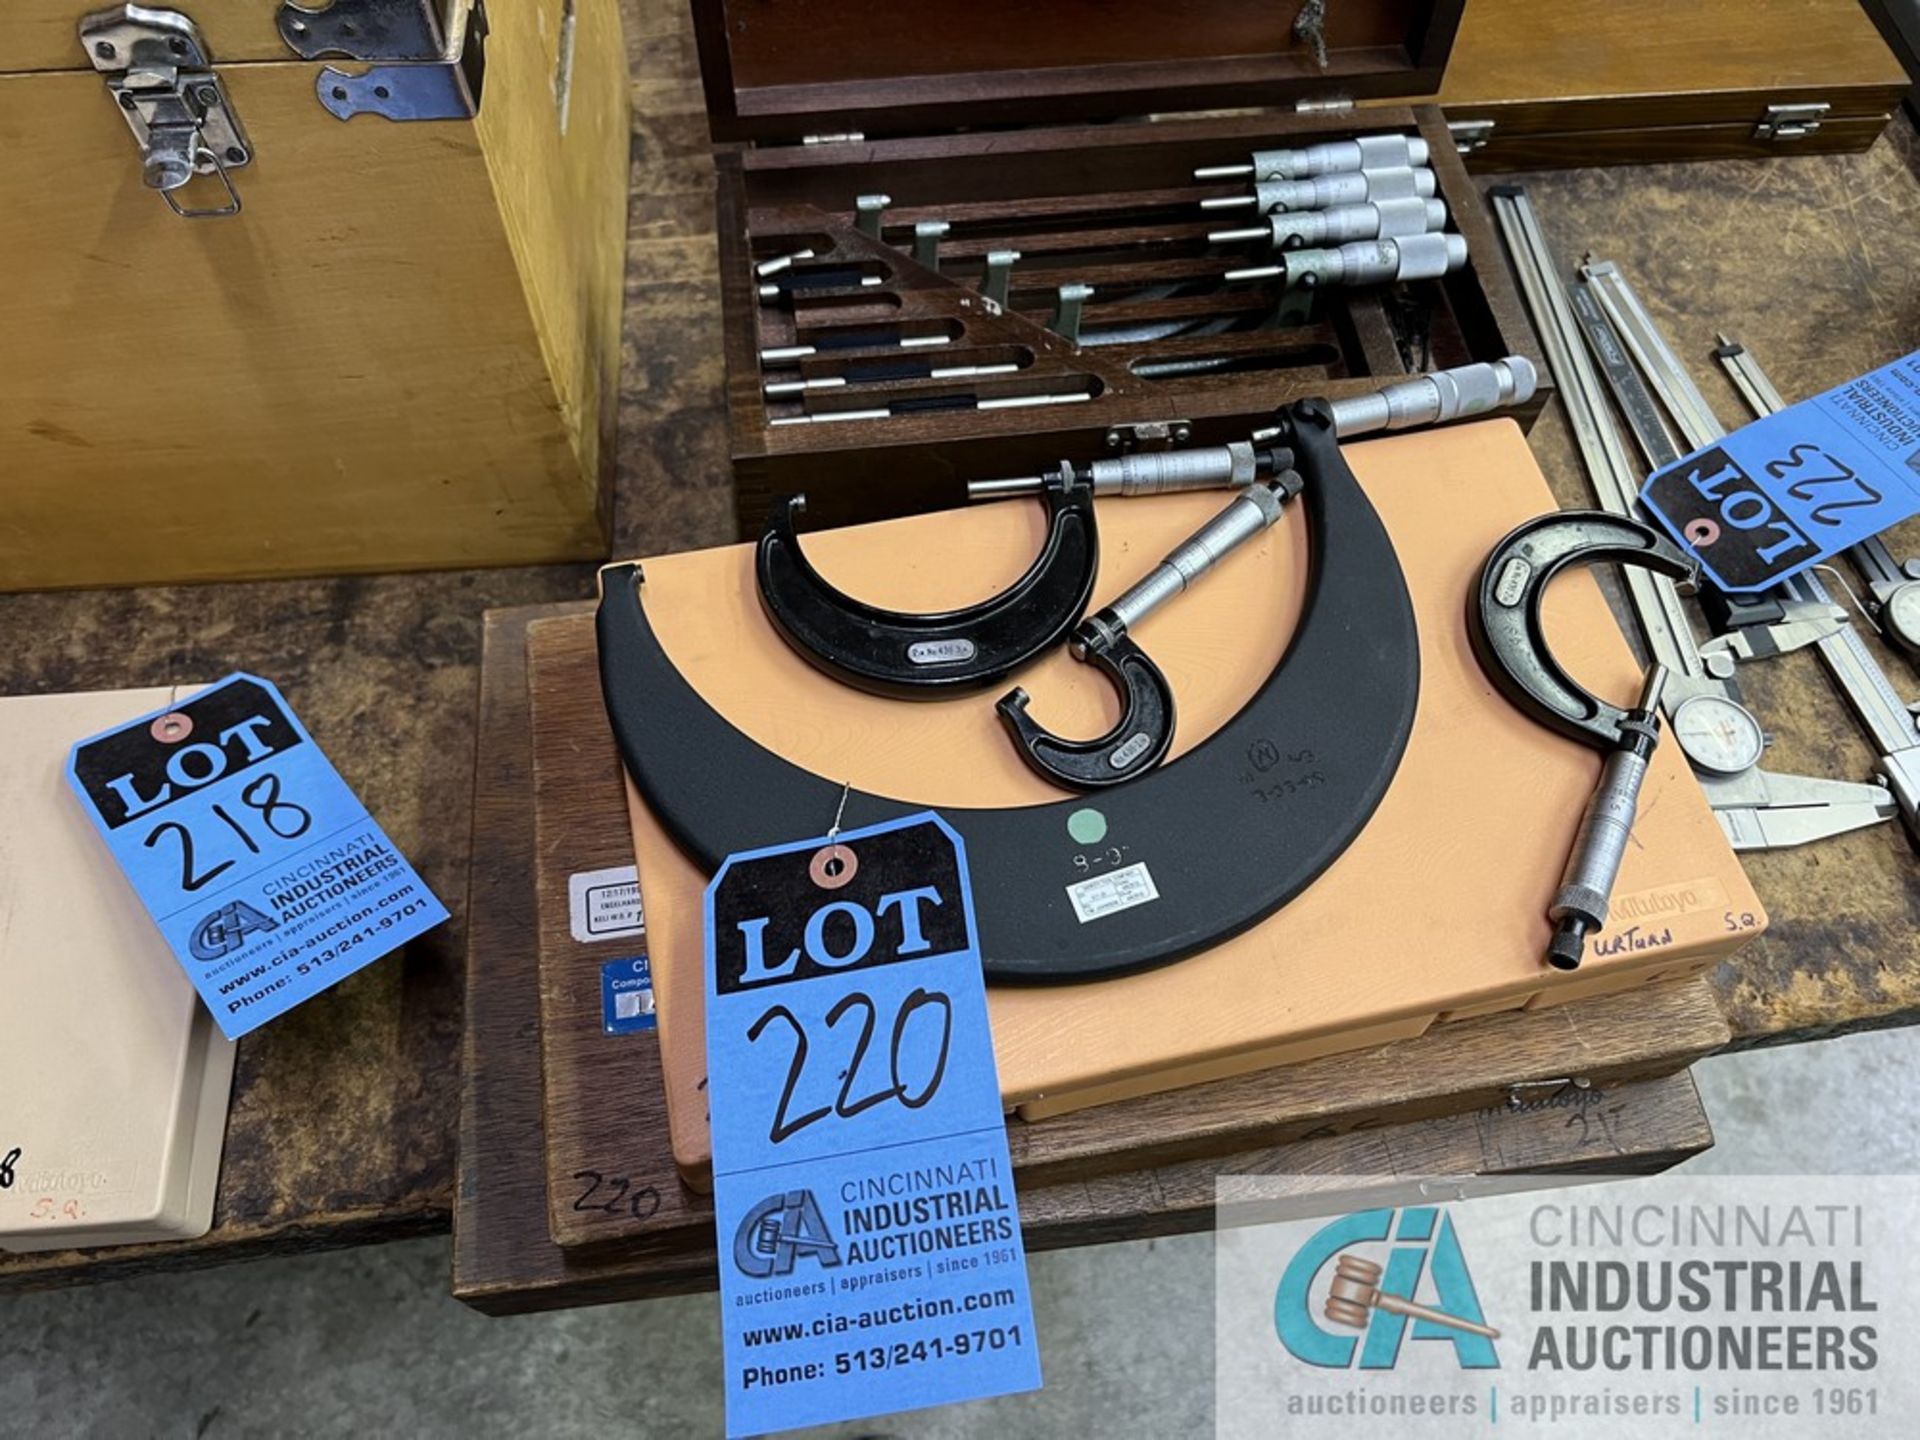 VARIOUS SIZE MICROMETERS **LOCATED AT 9150 PROSPECT STREET, INDIANAPOLIS, IN 46239 - REMOVAL BY